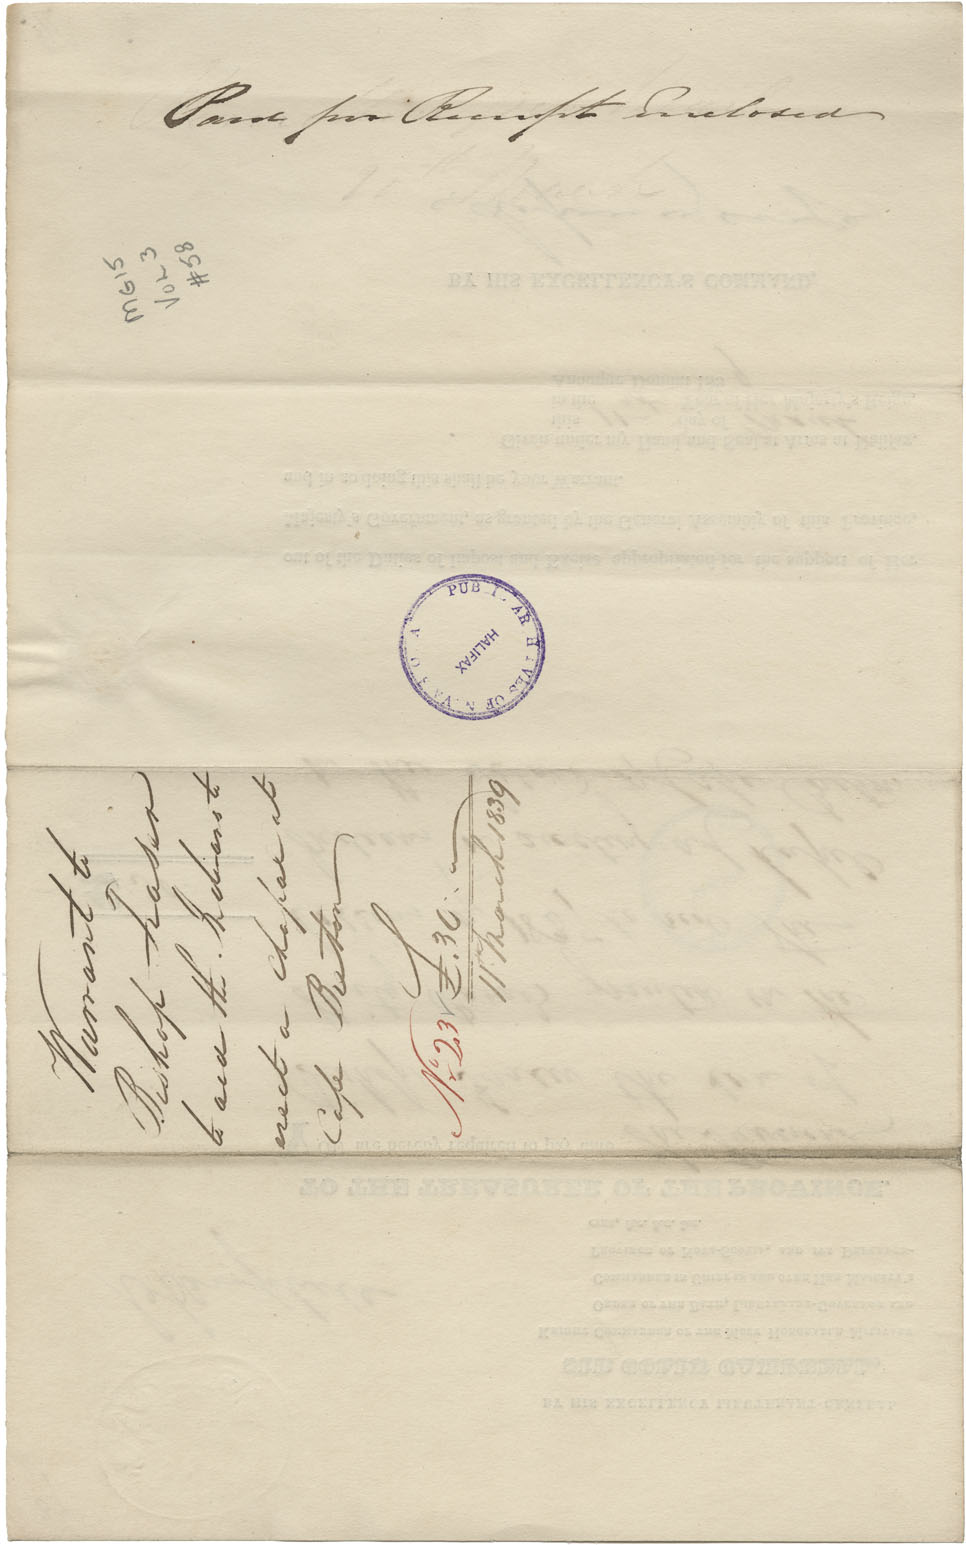 Warrant from Sir Colin Campbell to Bishop Fraser for £30-0-0 to aid the Mi'kmaq in erectig a chapel at Cape Breton. Receipt. 